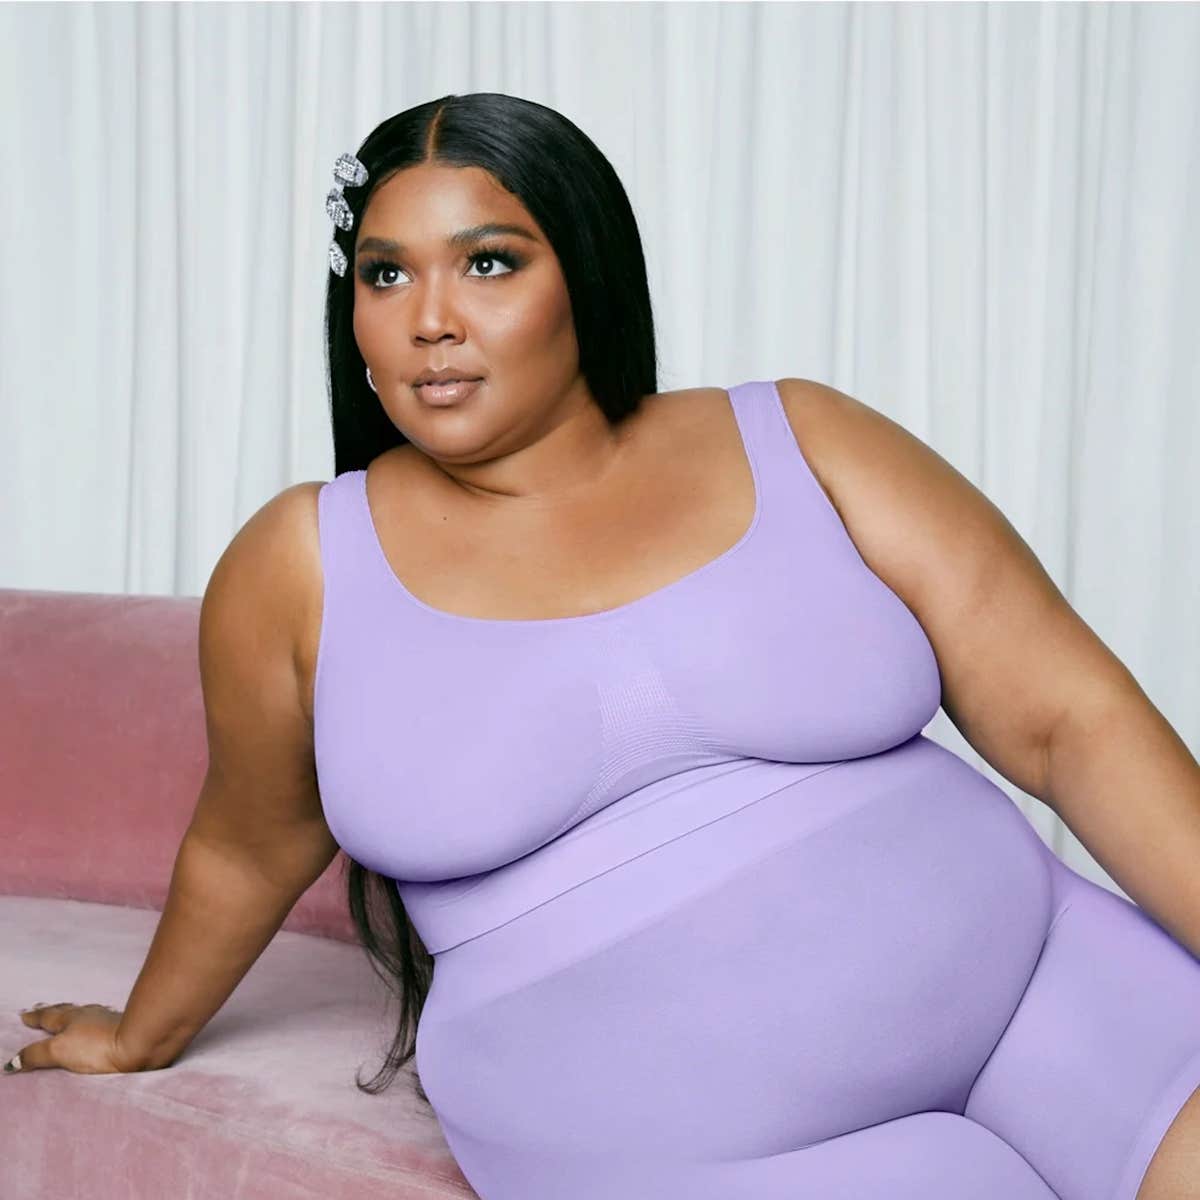 dommer plisseret ristet brød Lizzo's Shapewear Line: Why I Was Disappointed By Yitty